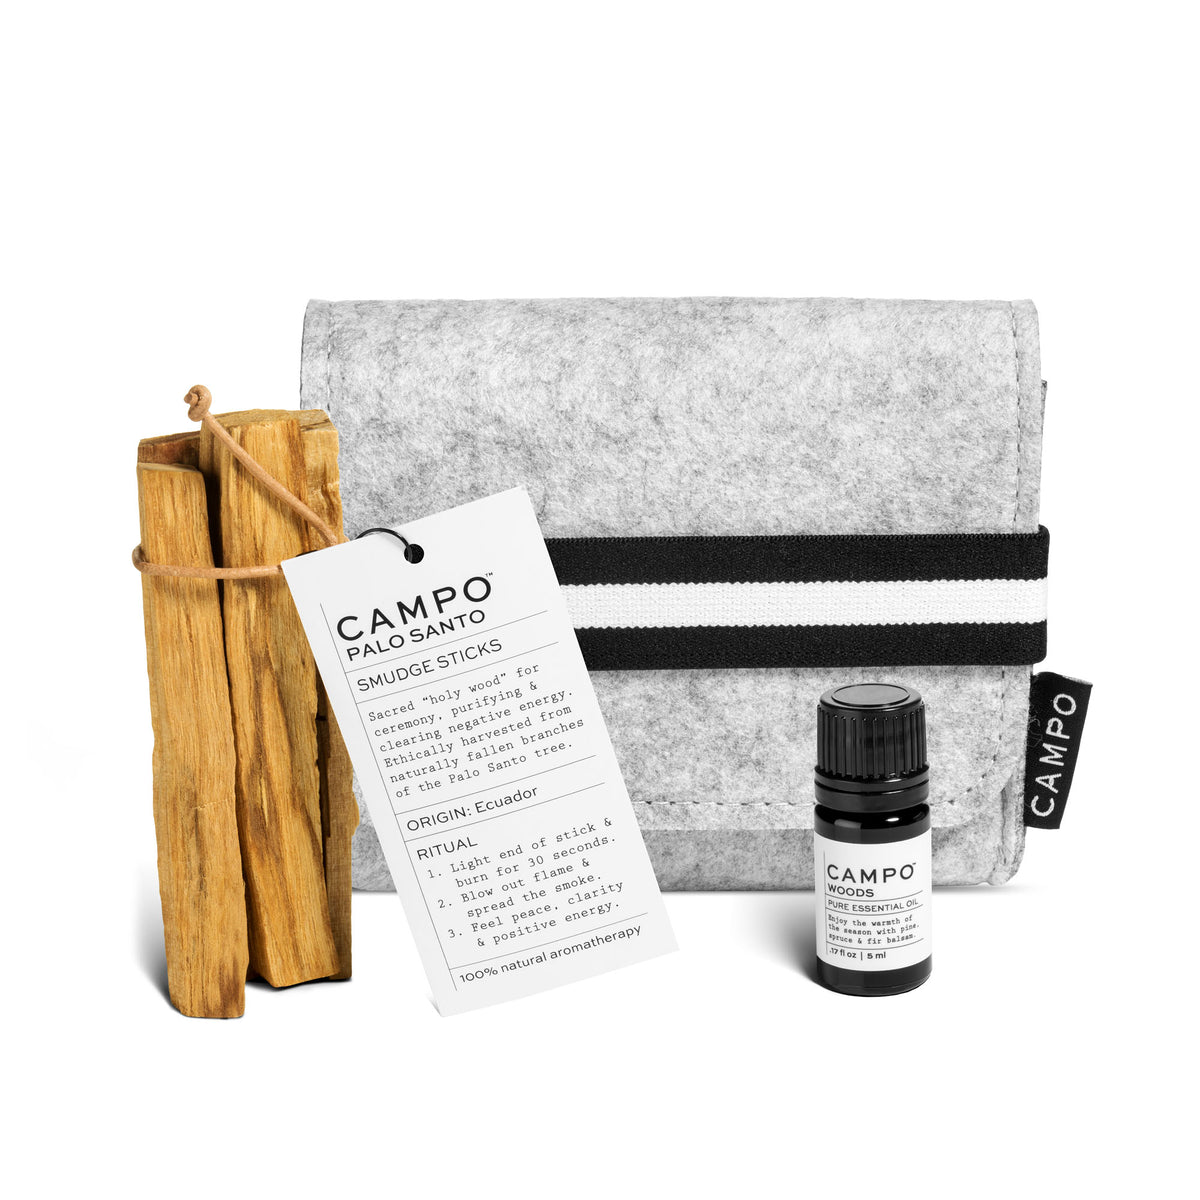 Campo Beauty Lift the spirits of any space or mood with this WOOD Kit.   Includes: WOODS PURE ESSENTIAL OIL 5ml + PALO SANTO + Grey Felt Bag.  WOODS: Transport &amp; Transform yourself with this 100% pure essential oil blend of Pine Scotch, Siberian Fir, Balsam Fir, Black Spruce, and Bergamot. A distinctive scent inspired by the smell of a fresh-cut tree and a walk in the woods. A perfect complement to CAMPO essential oil diffusers. Add a few drops to your shower for the ultimate indoor adventure.